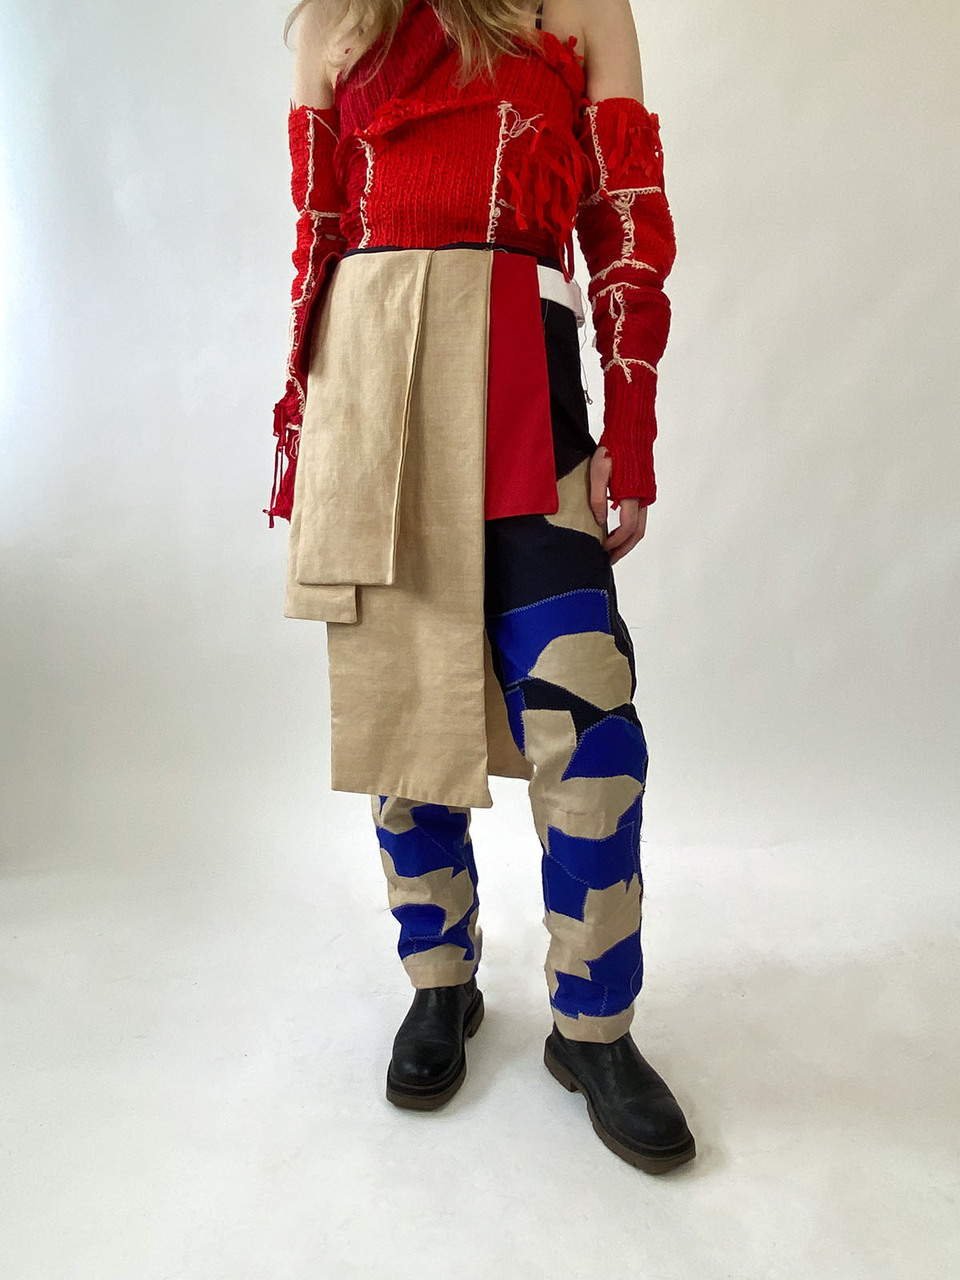 Gender neutral clothing design featuring patchwork straigh leg trouser in black, blue and khaki, red shoulderless woolen jumper with exposed white stitched seams and belt slung draped fabric 